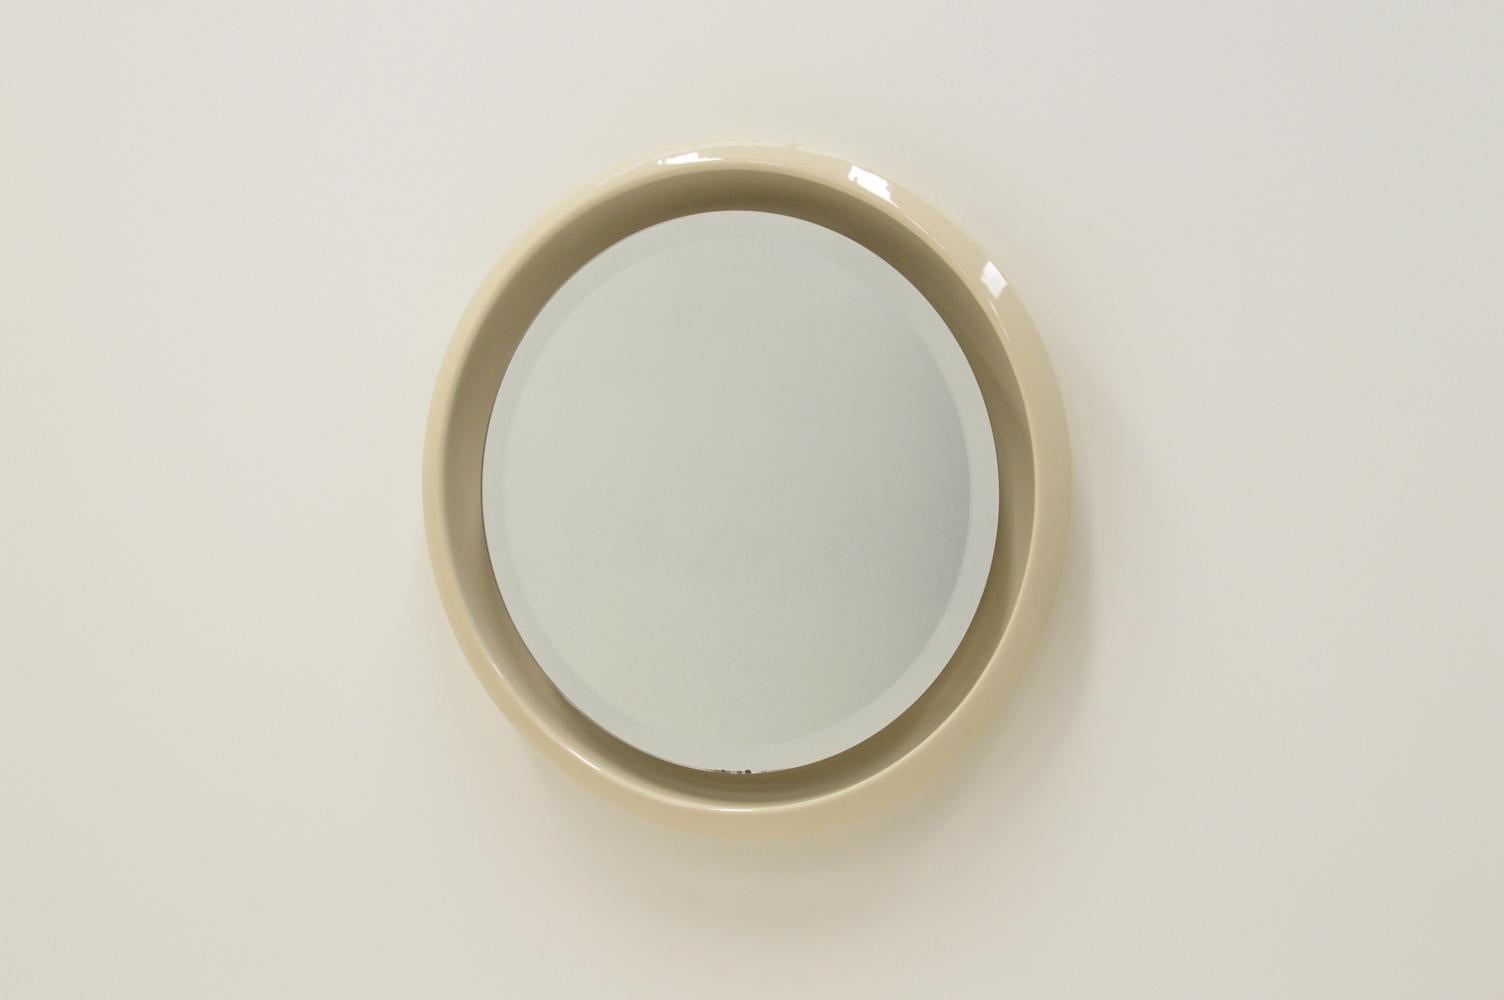 Large round ceramic mirror, 1960s. Thick ceramic frame in off white with floating mirror and light. The light shines thru the open space between the frame and mirror. The old round TL is replaced with an LED TL. This is an heivy mirror. Some loss on